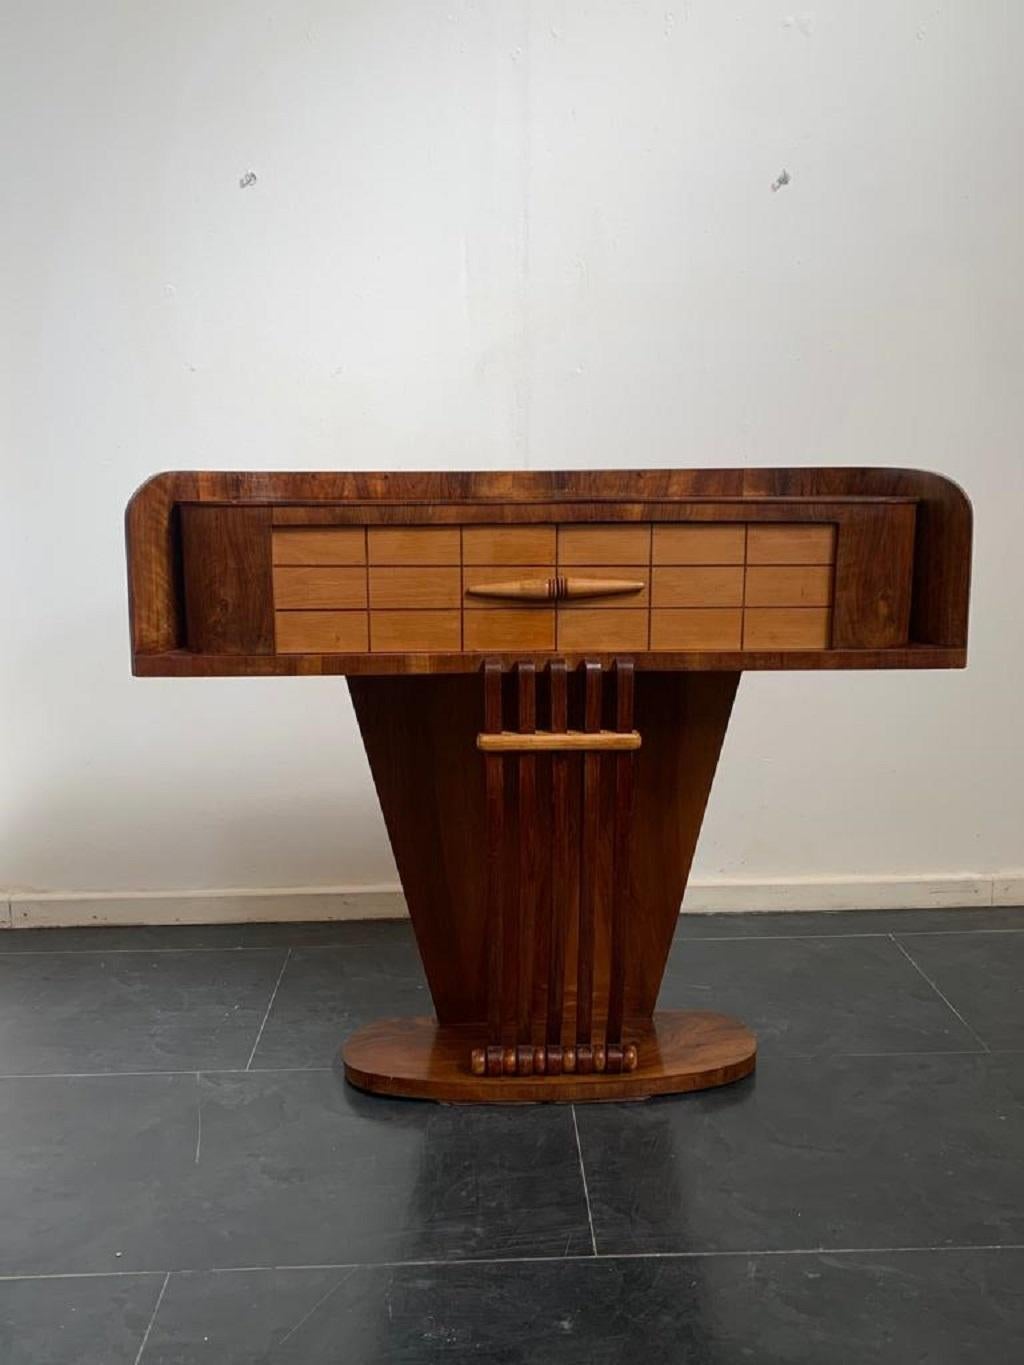 Art Deco console in maple and walnut with rosewood thread inlays, 1920s-30s. It shows slight signs due to age and use.
Packaging with bubble wrap and cardboard boxes is included. If the wooden packaging is needed (fumigated crates or boxes) for US